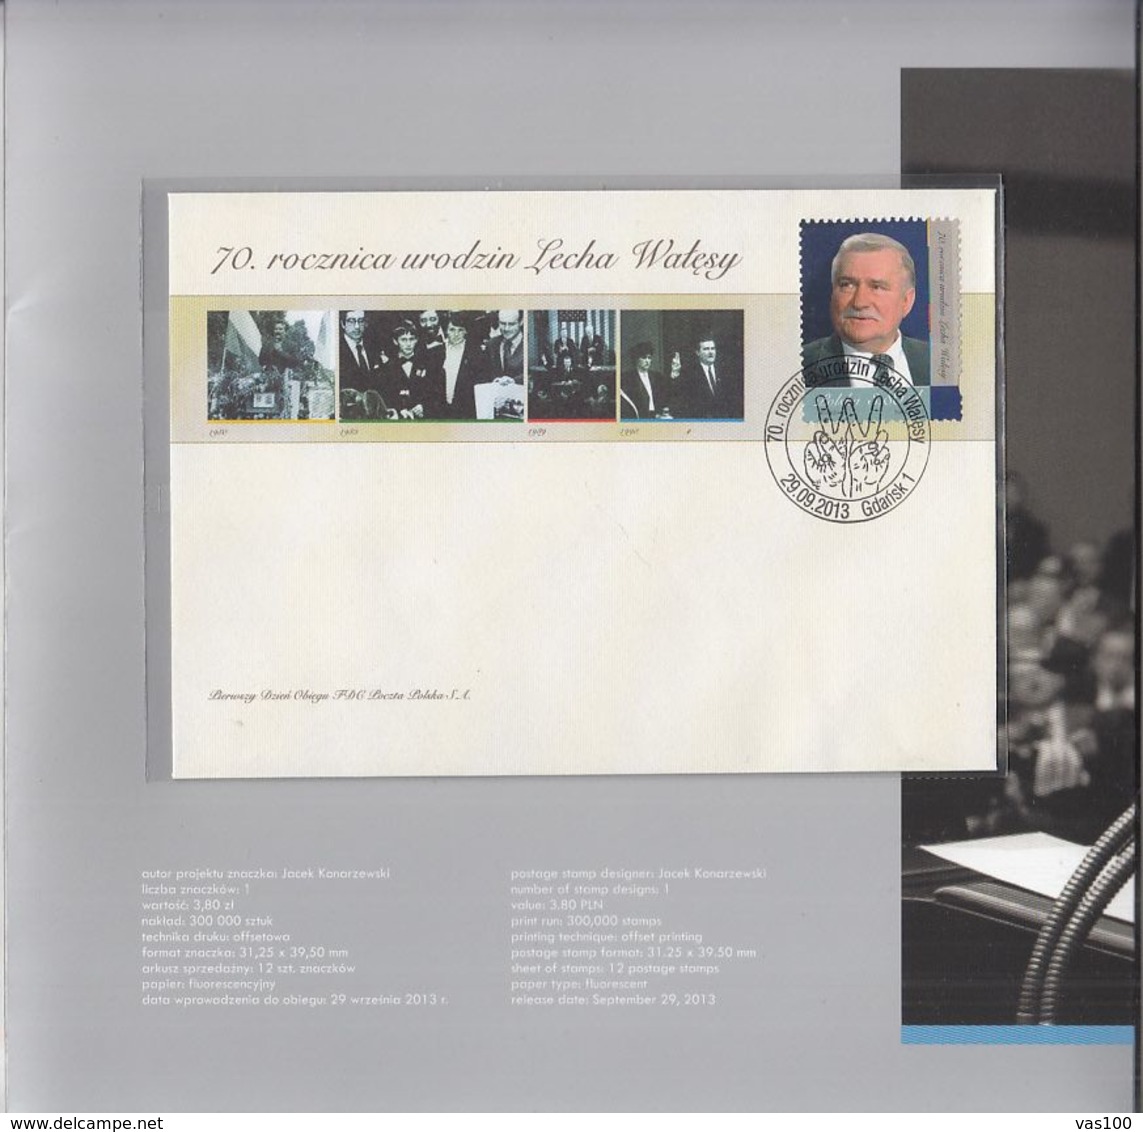 LECH WALESA ANNIVERSARY BOOKLET WITH COVER FDC AND RED BIG COVER, 2013, POLAND - Postzegelboekjes